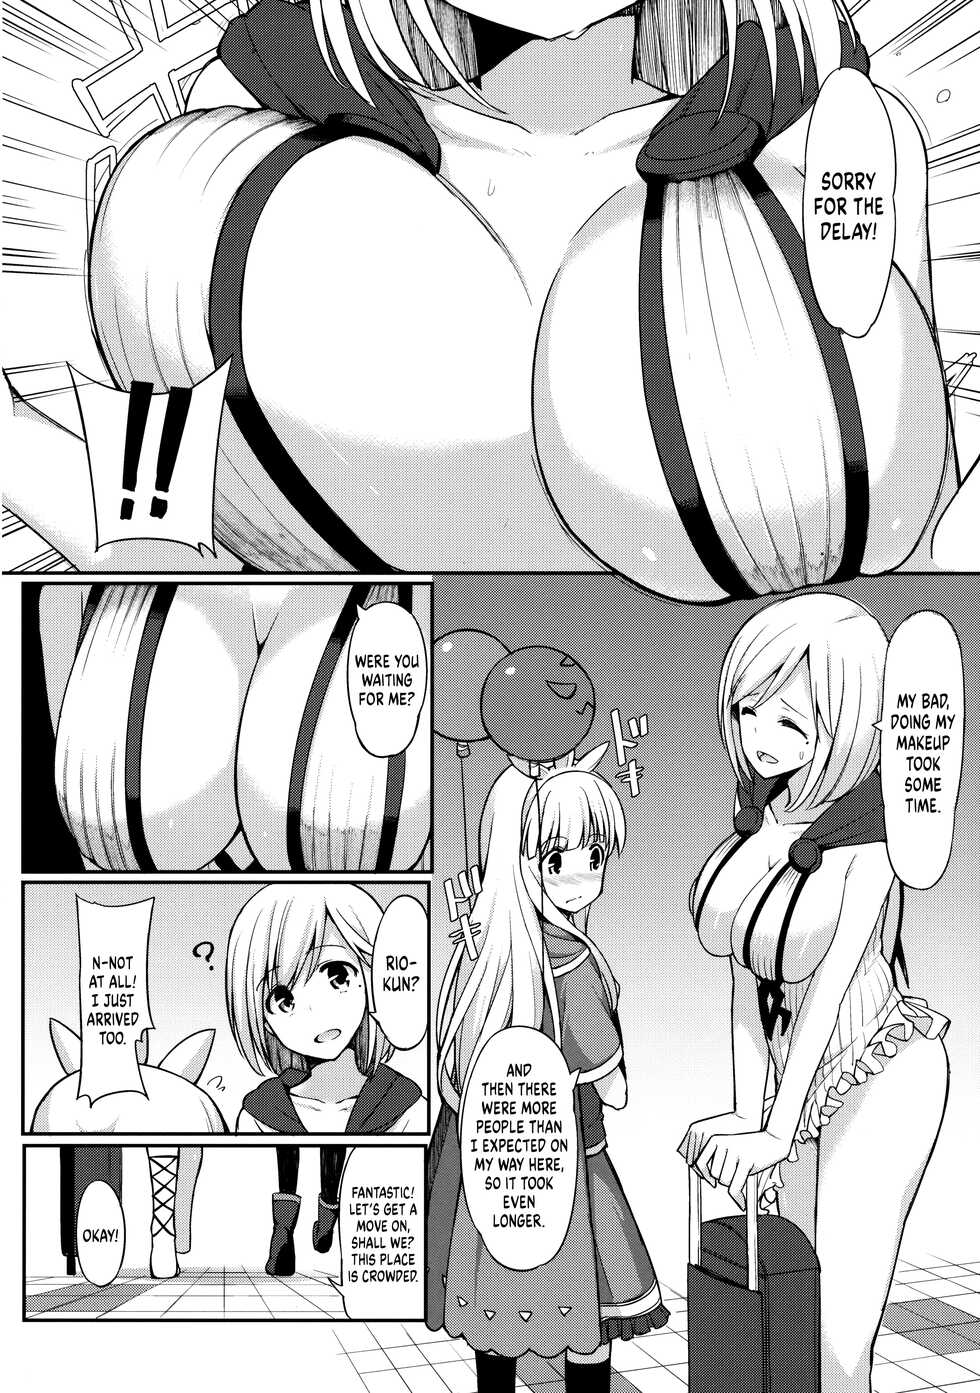 (SC2016 Winter) [H@BREAK (Itose Ikuto)] I Had a Cross Fate Episode at Comiket with an Onee-san I Met on Twitter and Spurted out Something Super Thick (Granblue Fantasy) [English] [head empty] - Page 3